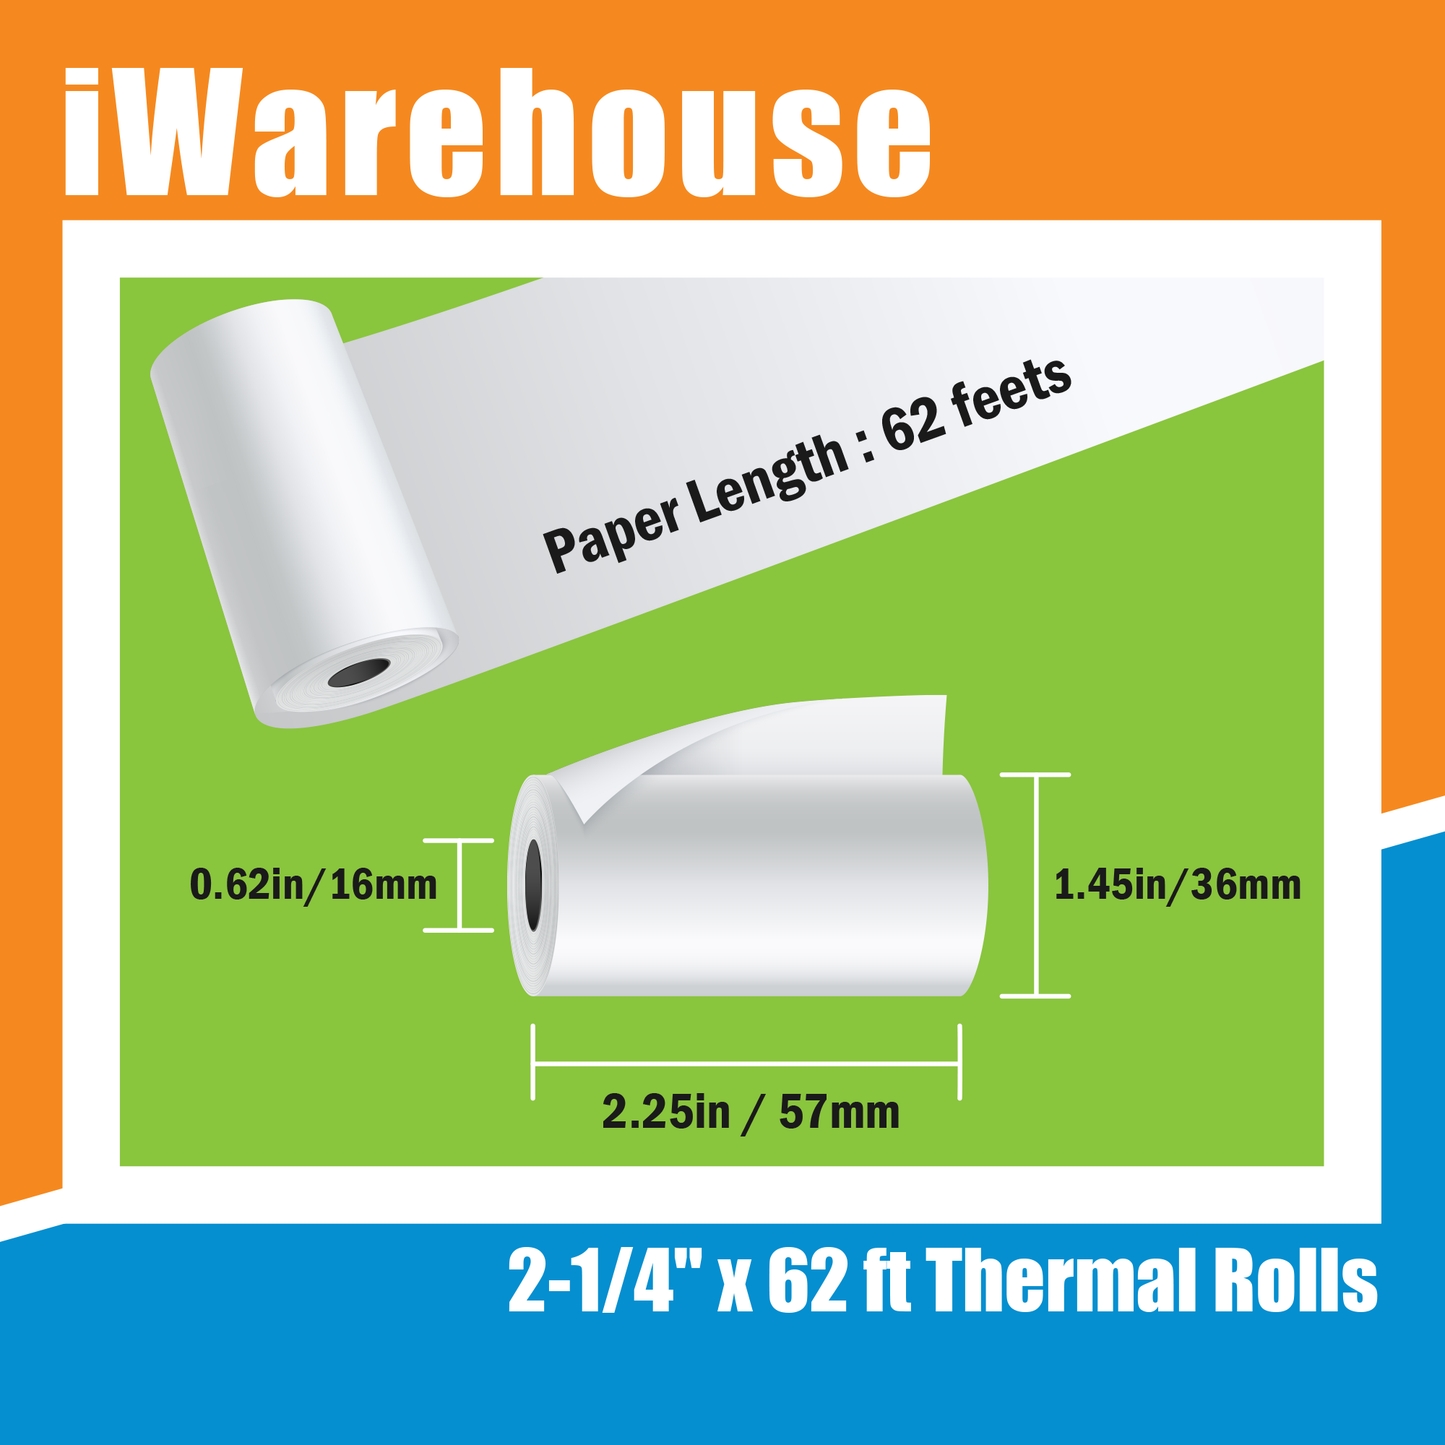 Thermal Paper Rolls for Credit/Debit Card Terminals - 2-1/4" x 62 ft